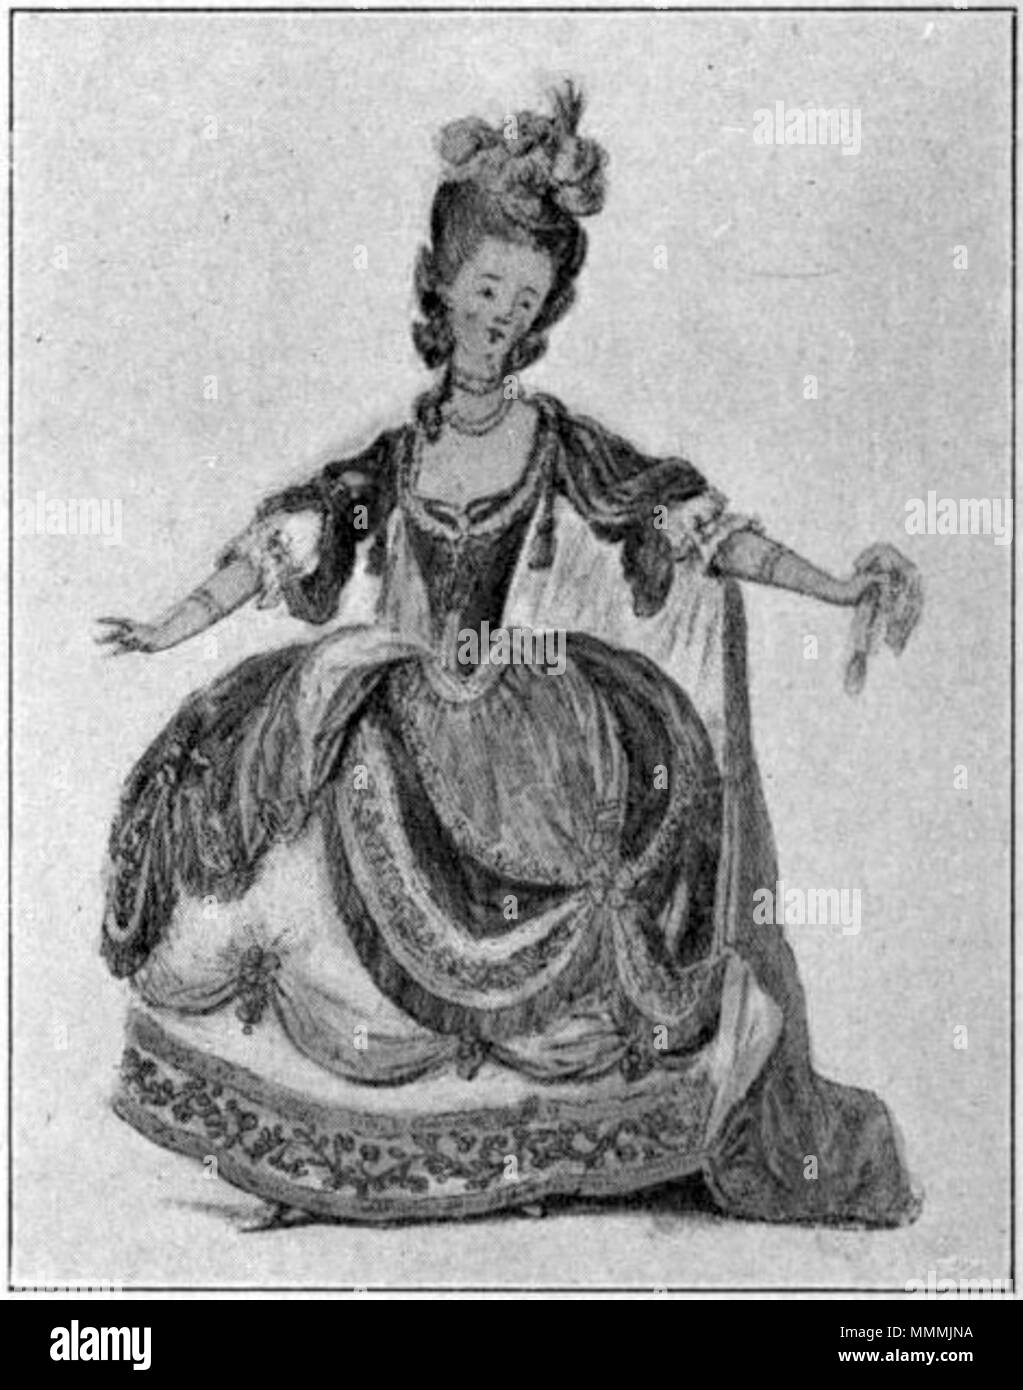 English: The costume of Chlytemnestra, as worn by Elisabet Olin. Picture  published in Volume 1 (of 8) of Nils Personne's history of Swedish theatre.  Svenska: Elisabet Olins kostym som Klytemnestra. Bild